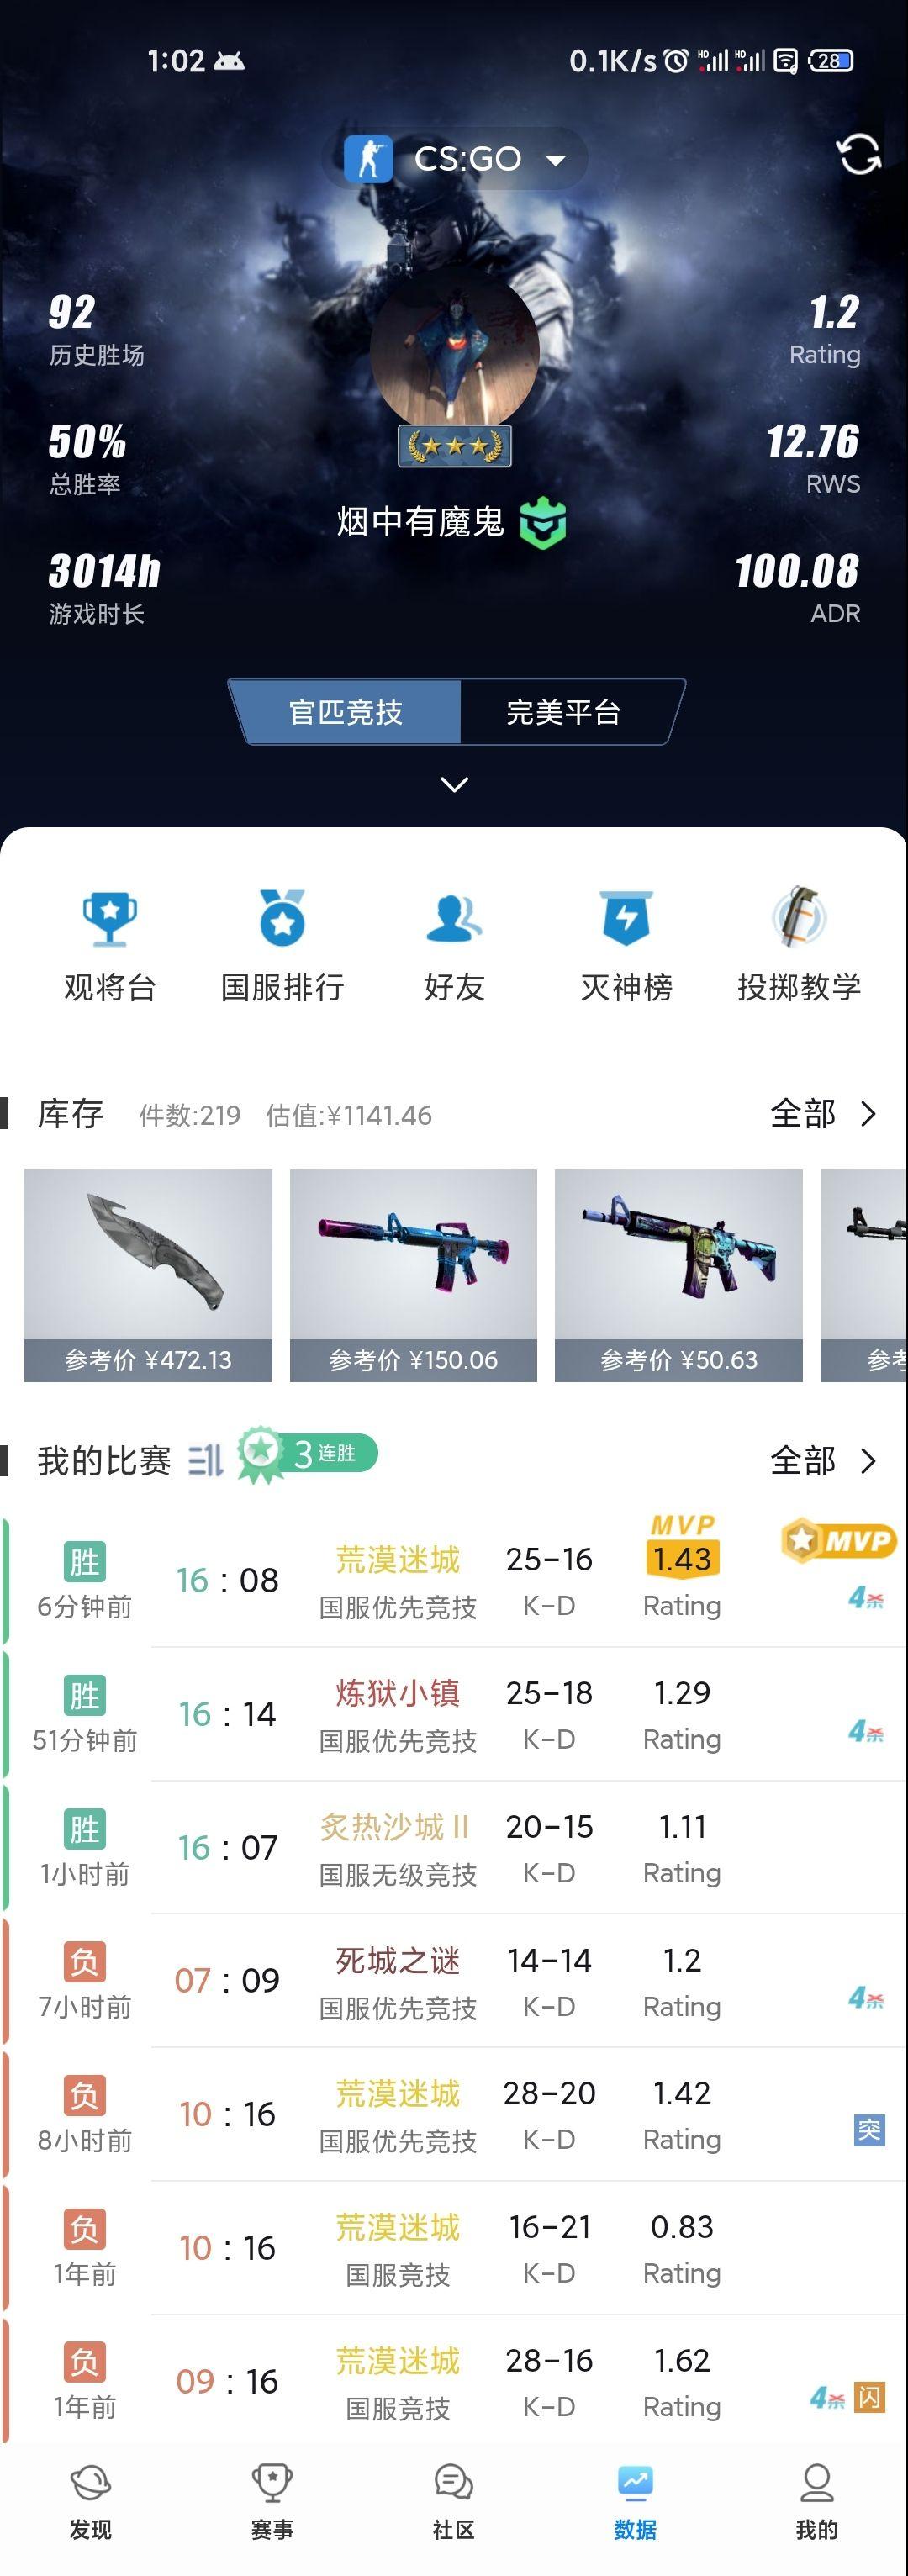 How the rank system works in CSGO | Mobile Forum